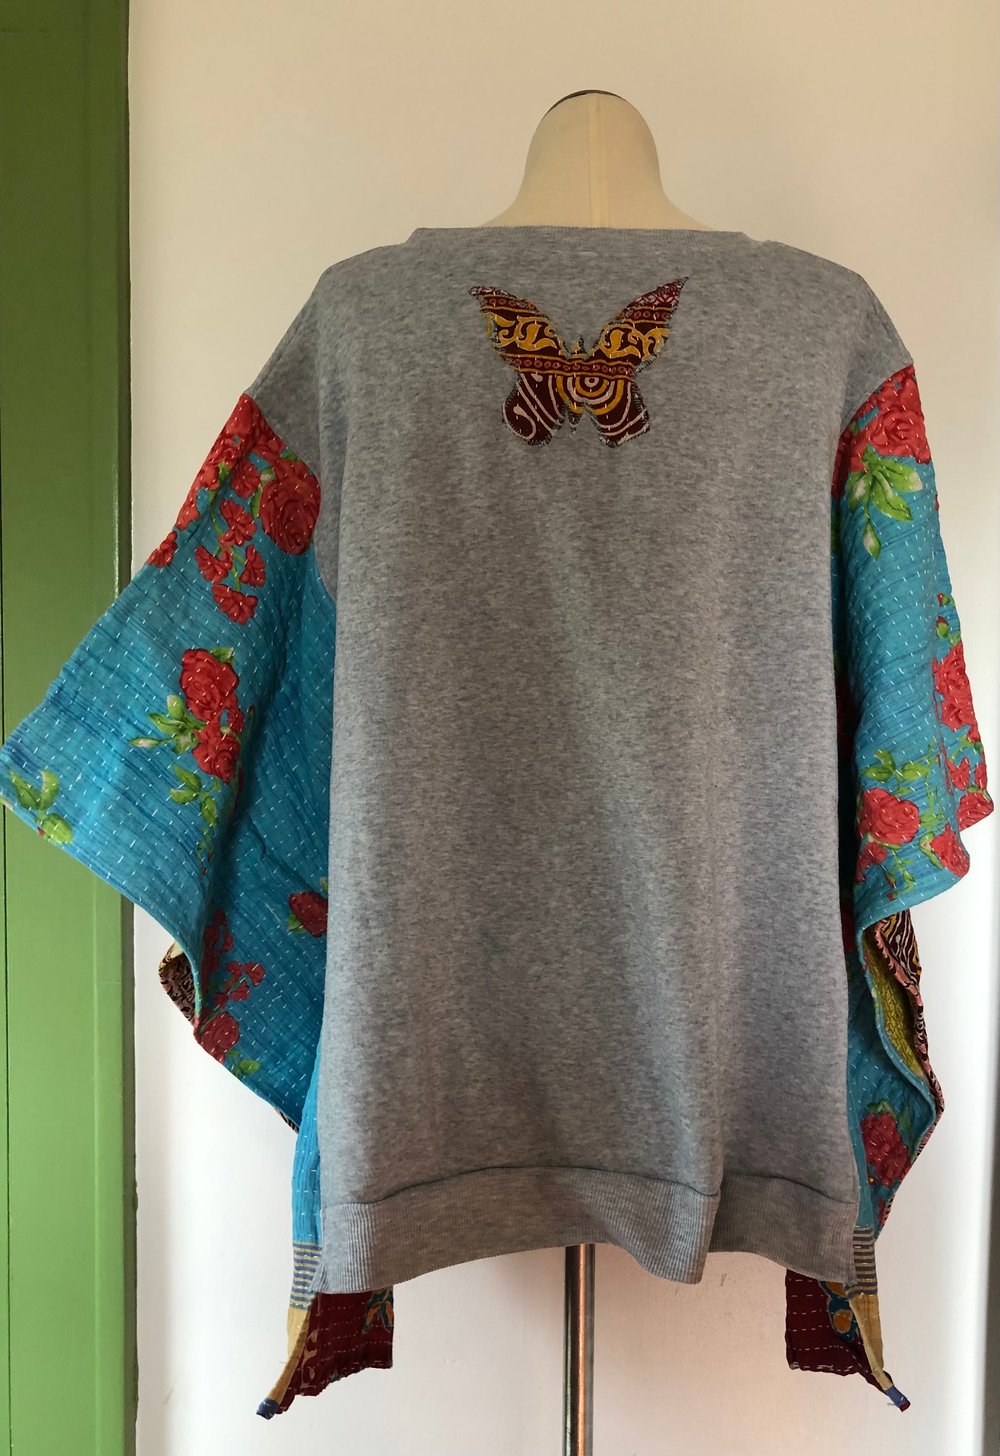 Upcycled “Beg Your Parton” fleece vintage quilt poncho